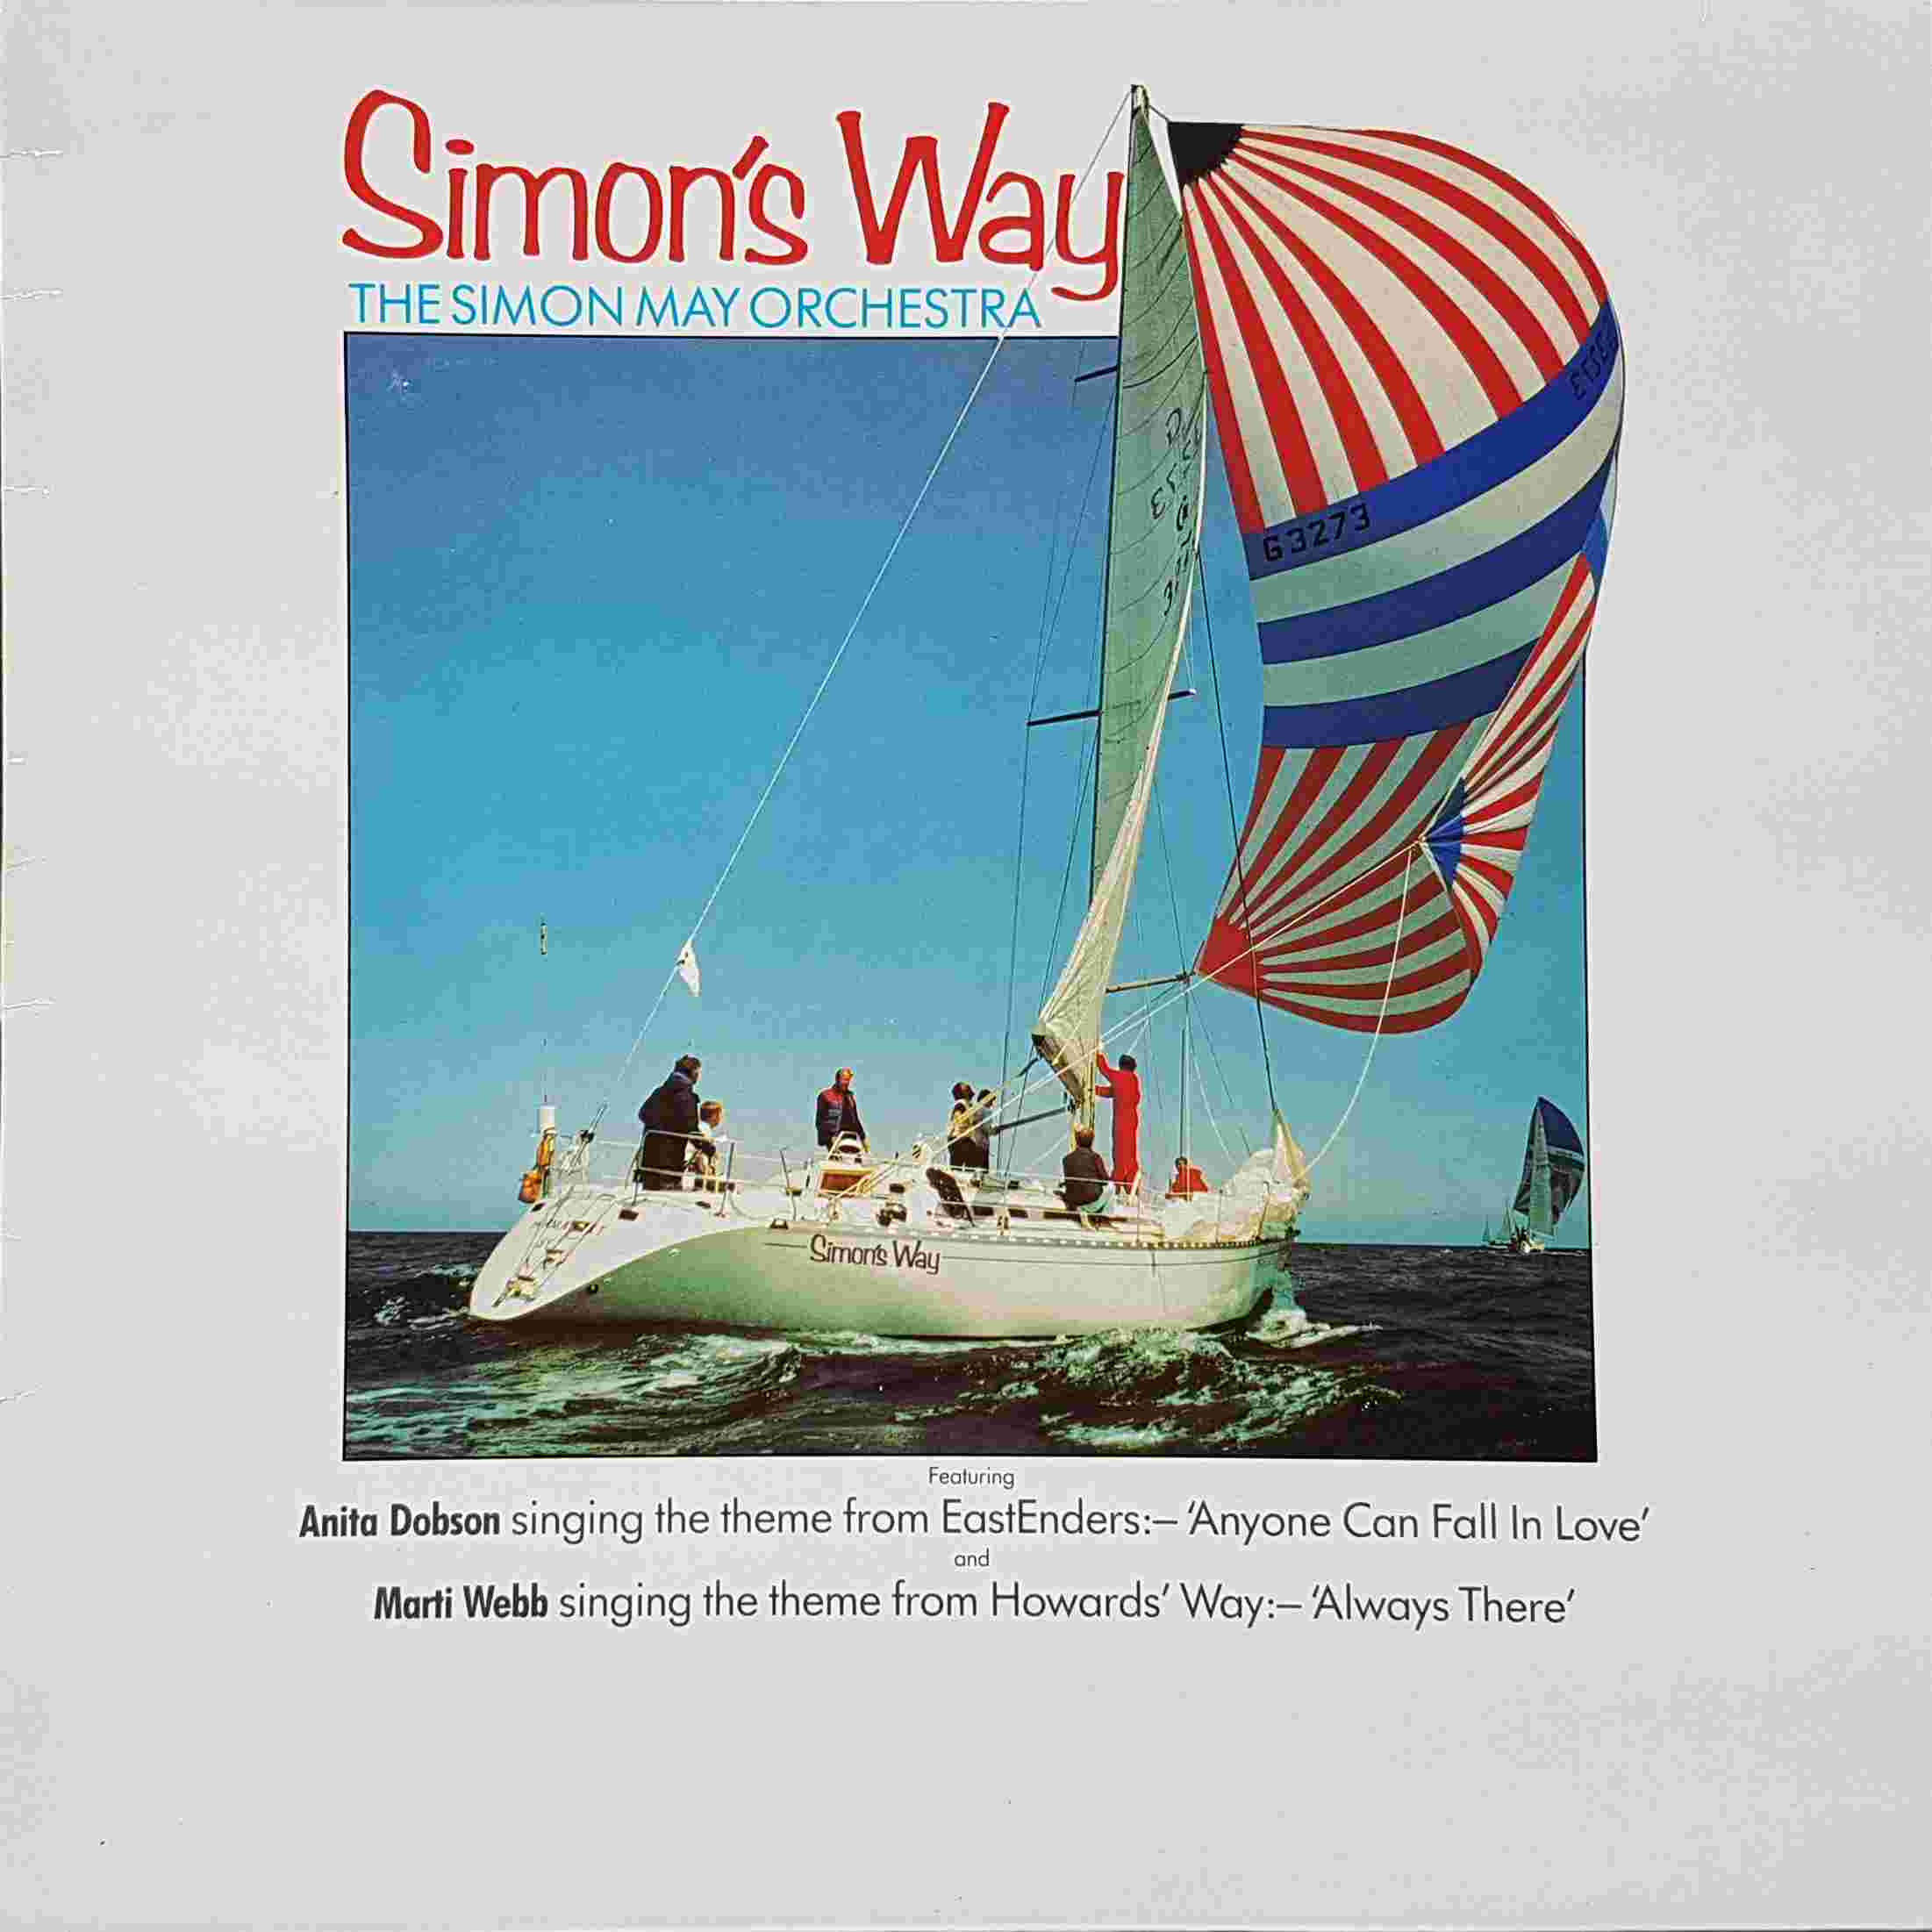 Picture of REB 594 Simon's way by artist Simon May from the BBC albums - Records and Tapes library